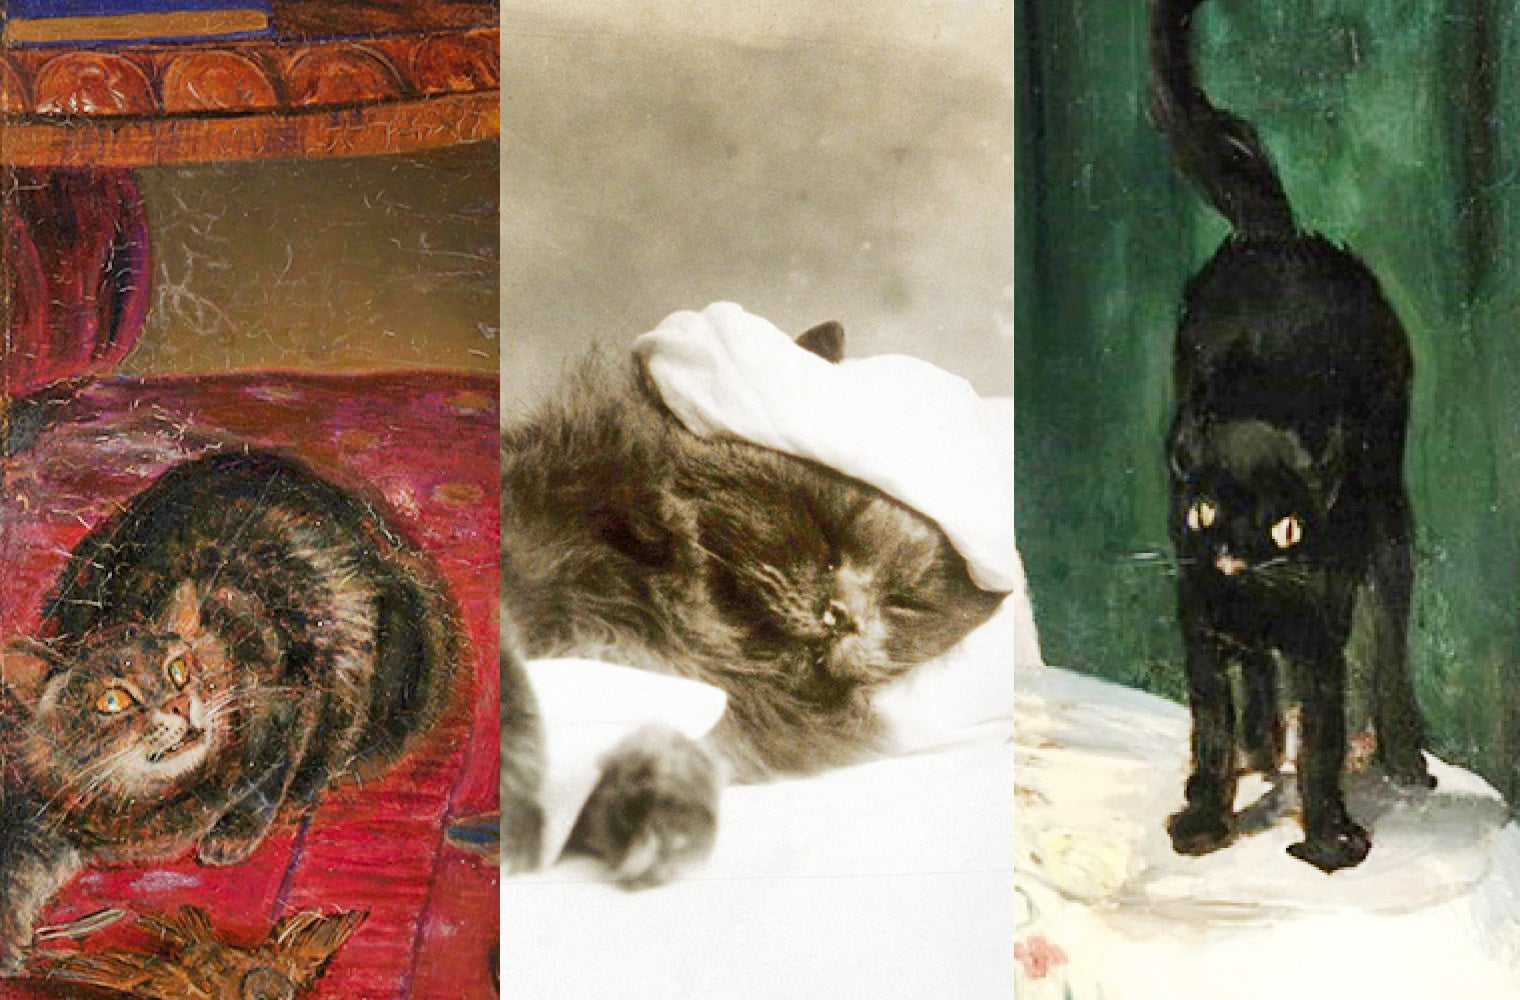 Smallest Asian Pussy - How cats have inspired artists from da Vinci to Warhol - USC Dornsife News